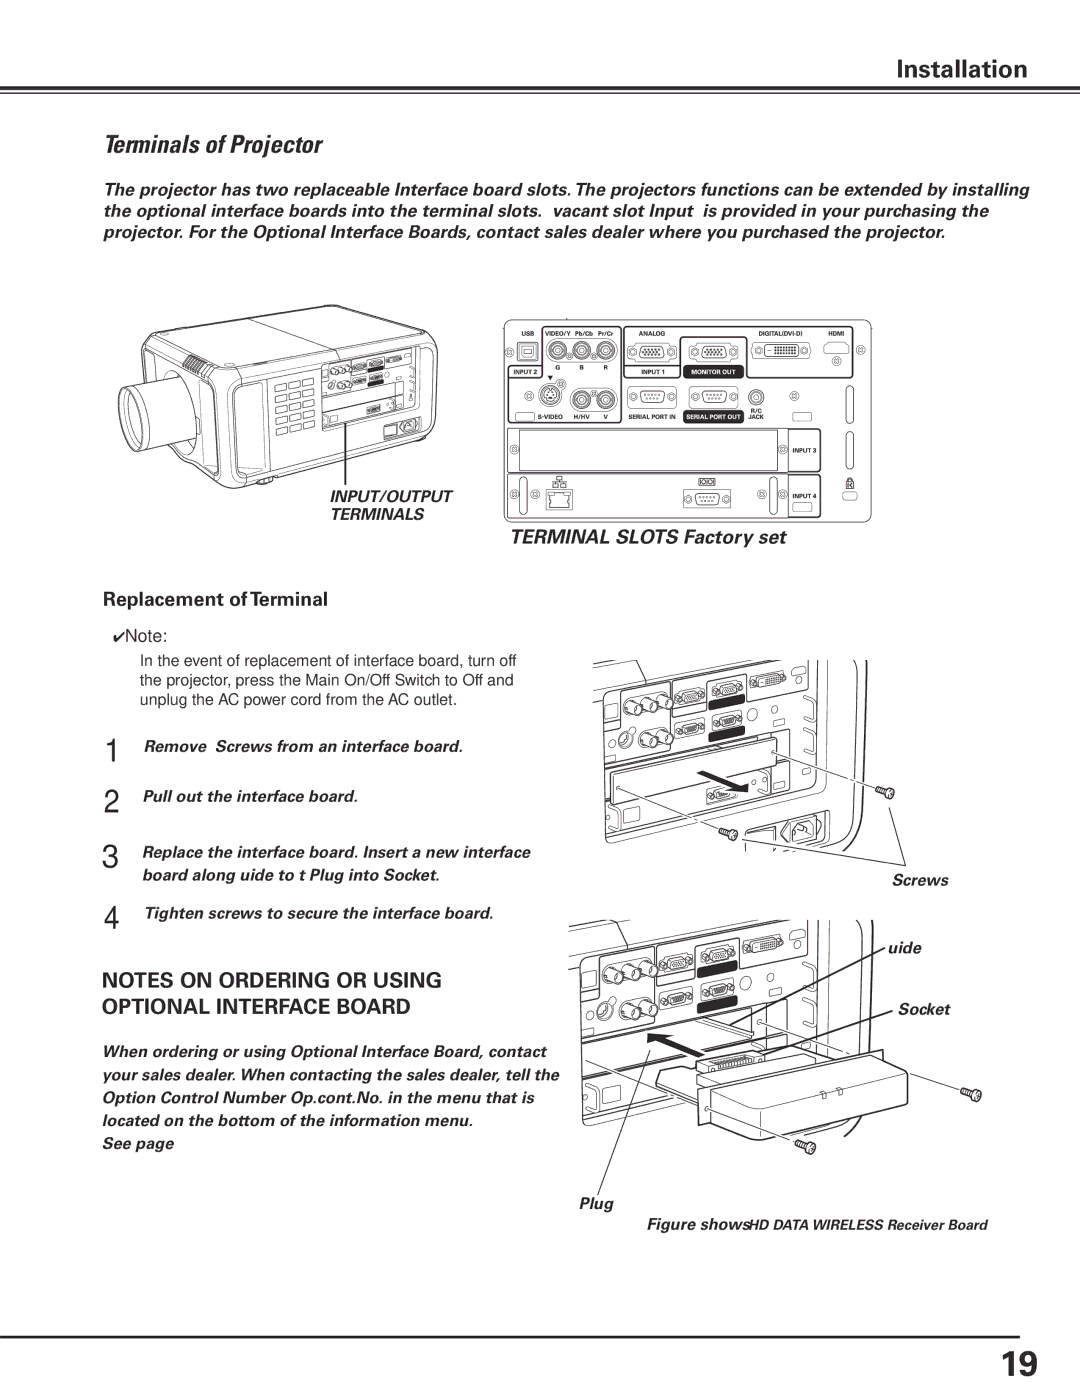 Sanyo PDG-DHT100L owner manual Terminals of Projector, Replacement of Terminal 